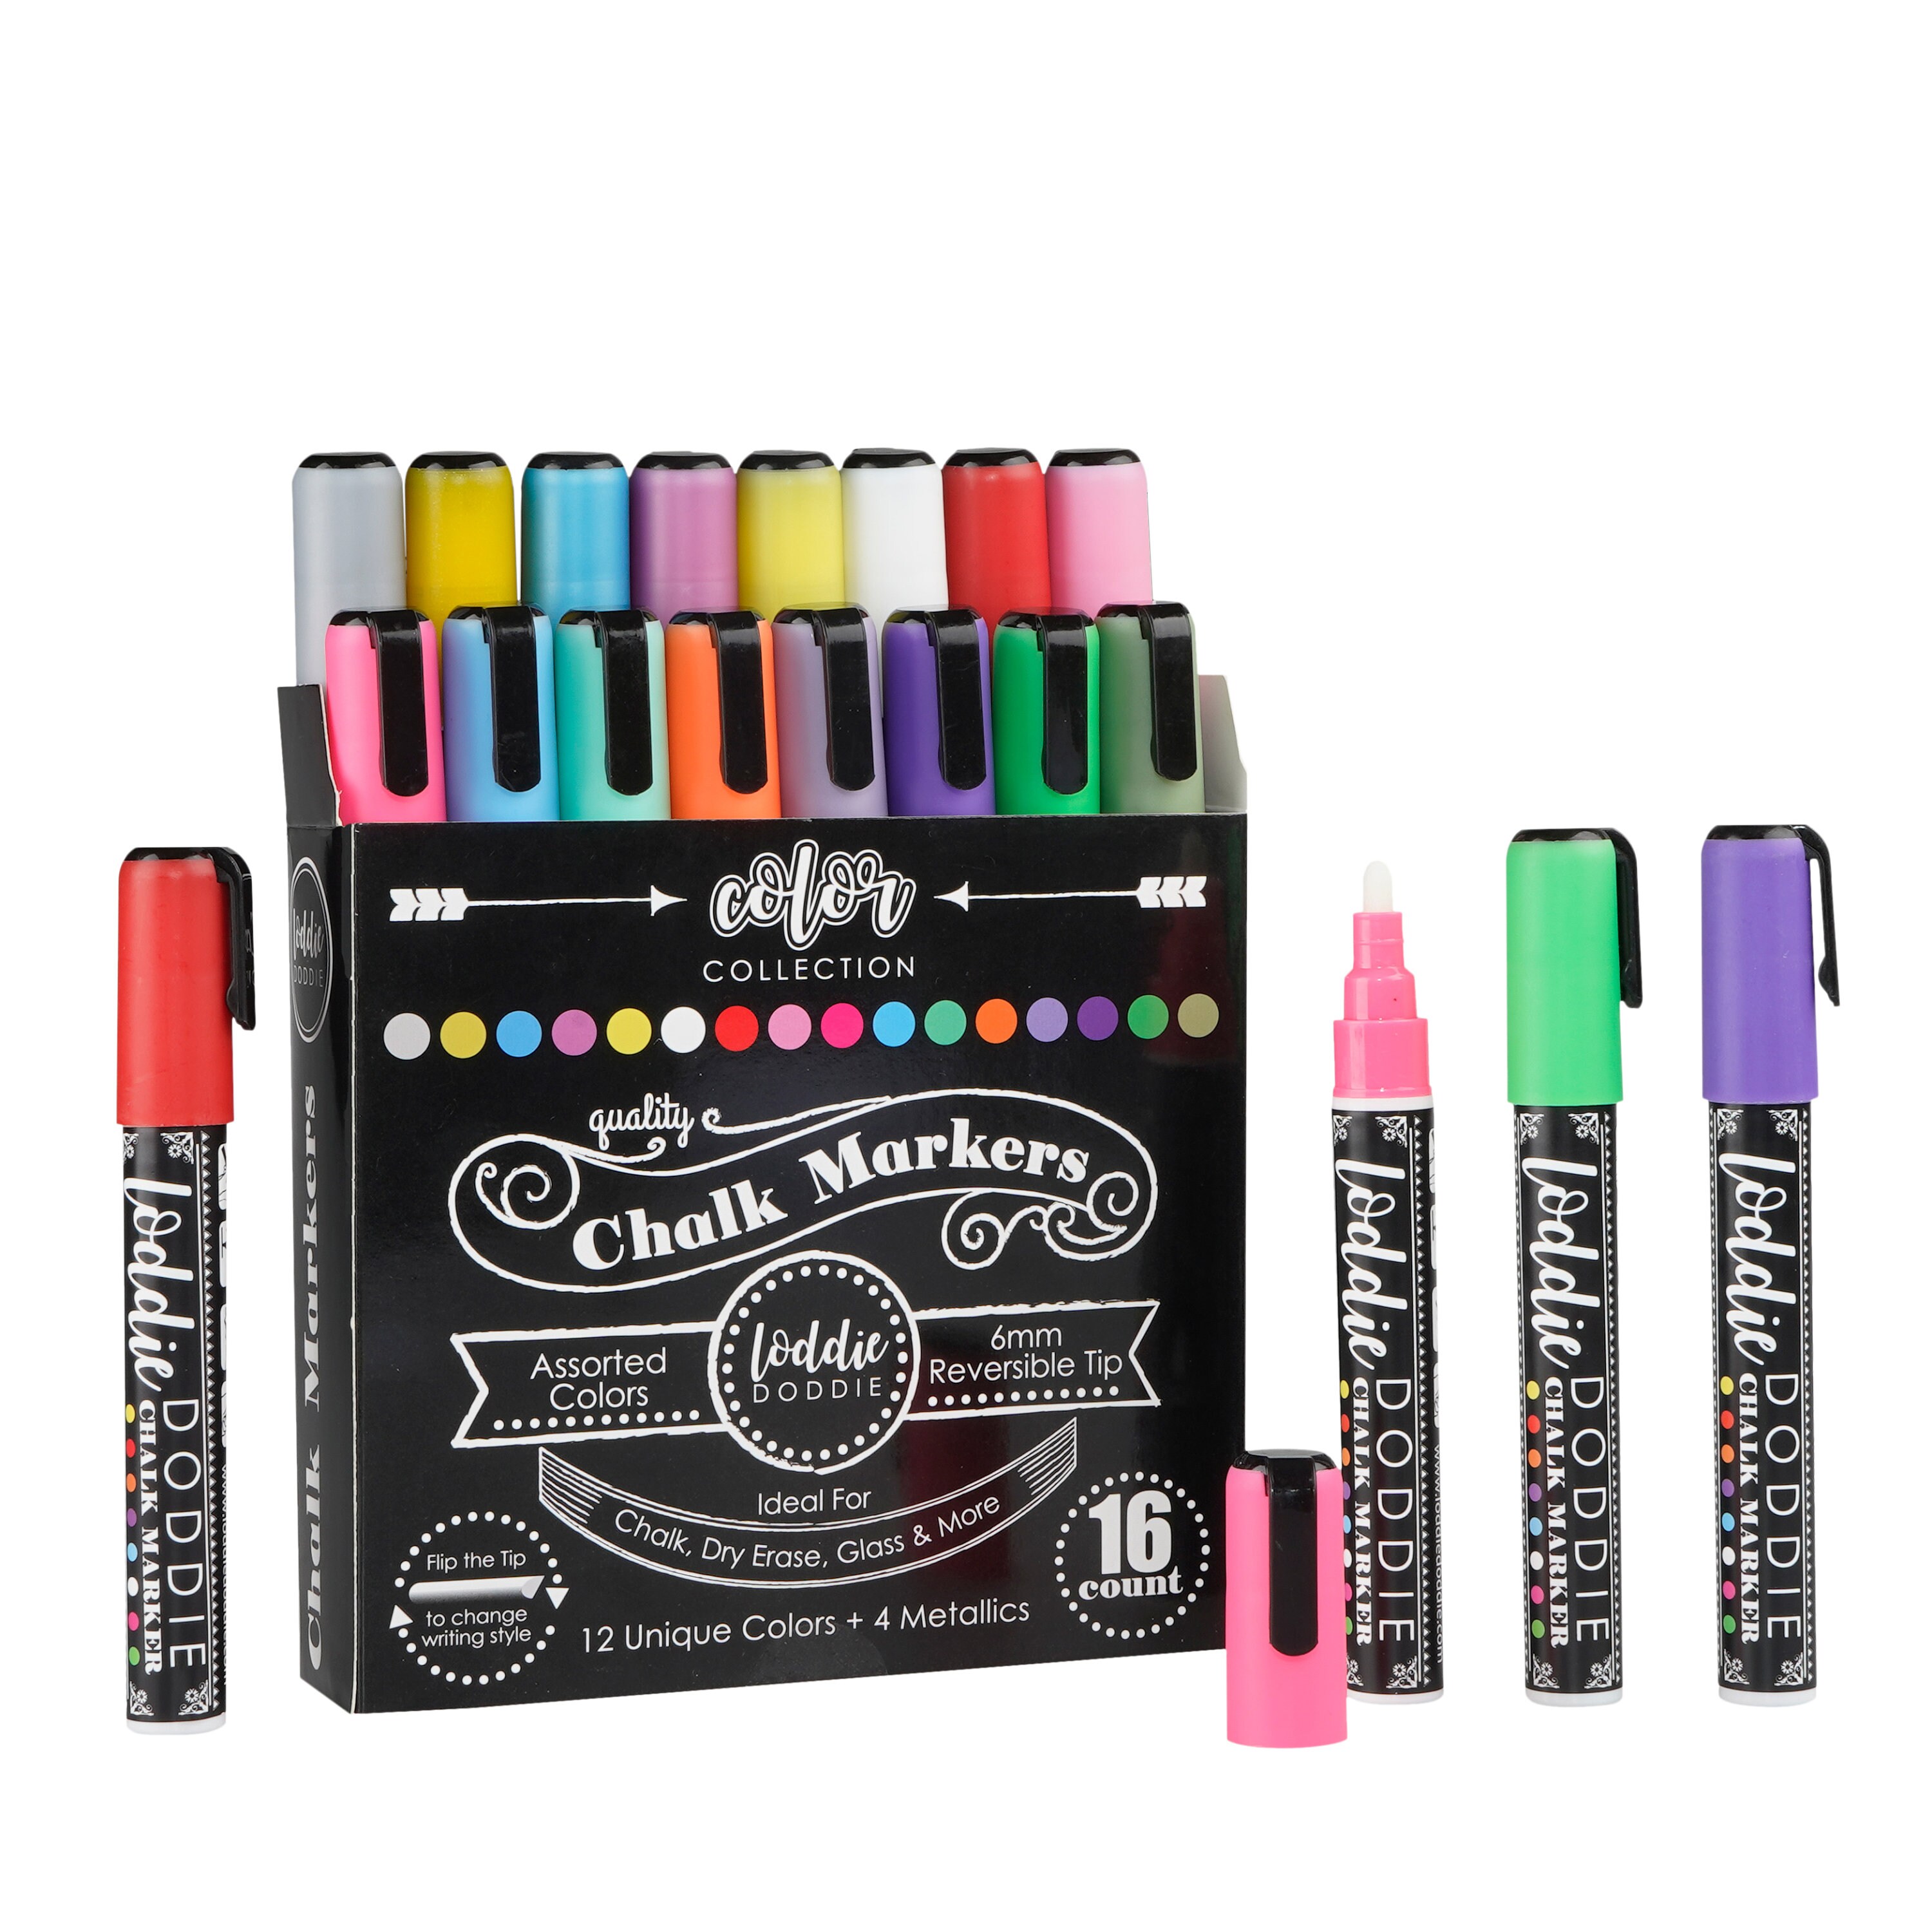 Fine Tip Chalk Pens 3 pack - White - reversible tip liquid chalk (round and  chisel) markers FREE SHIPPING